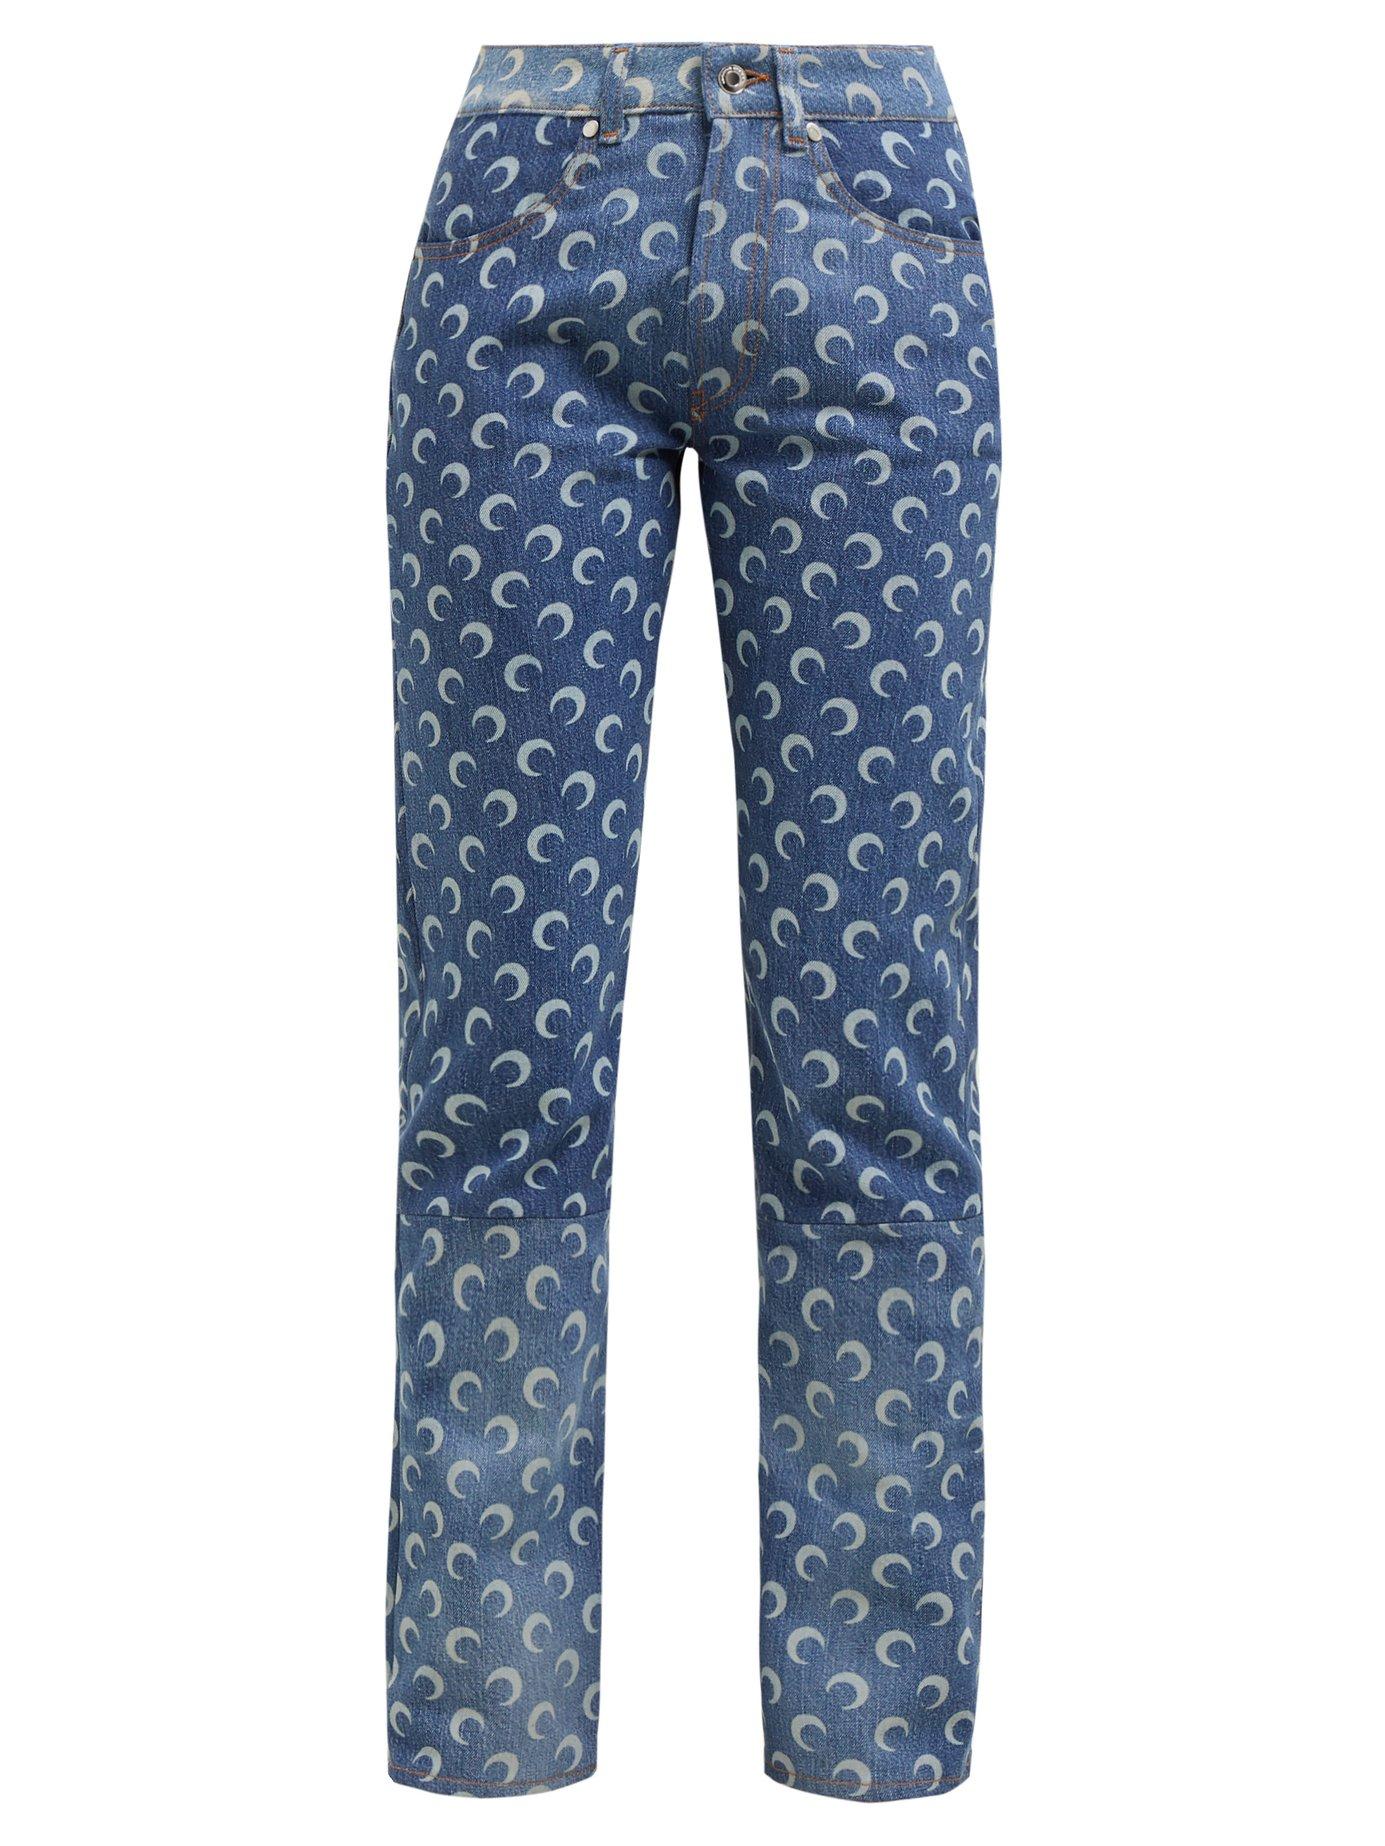 Marine Serre Crescent Moon Patterned Jeans in Blue | Lyst